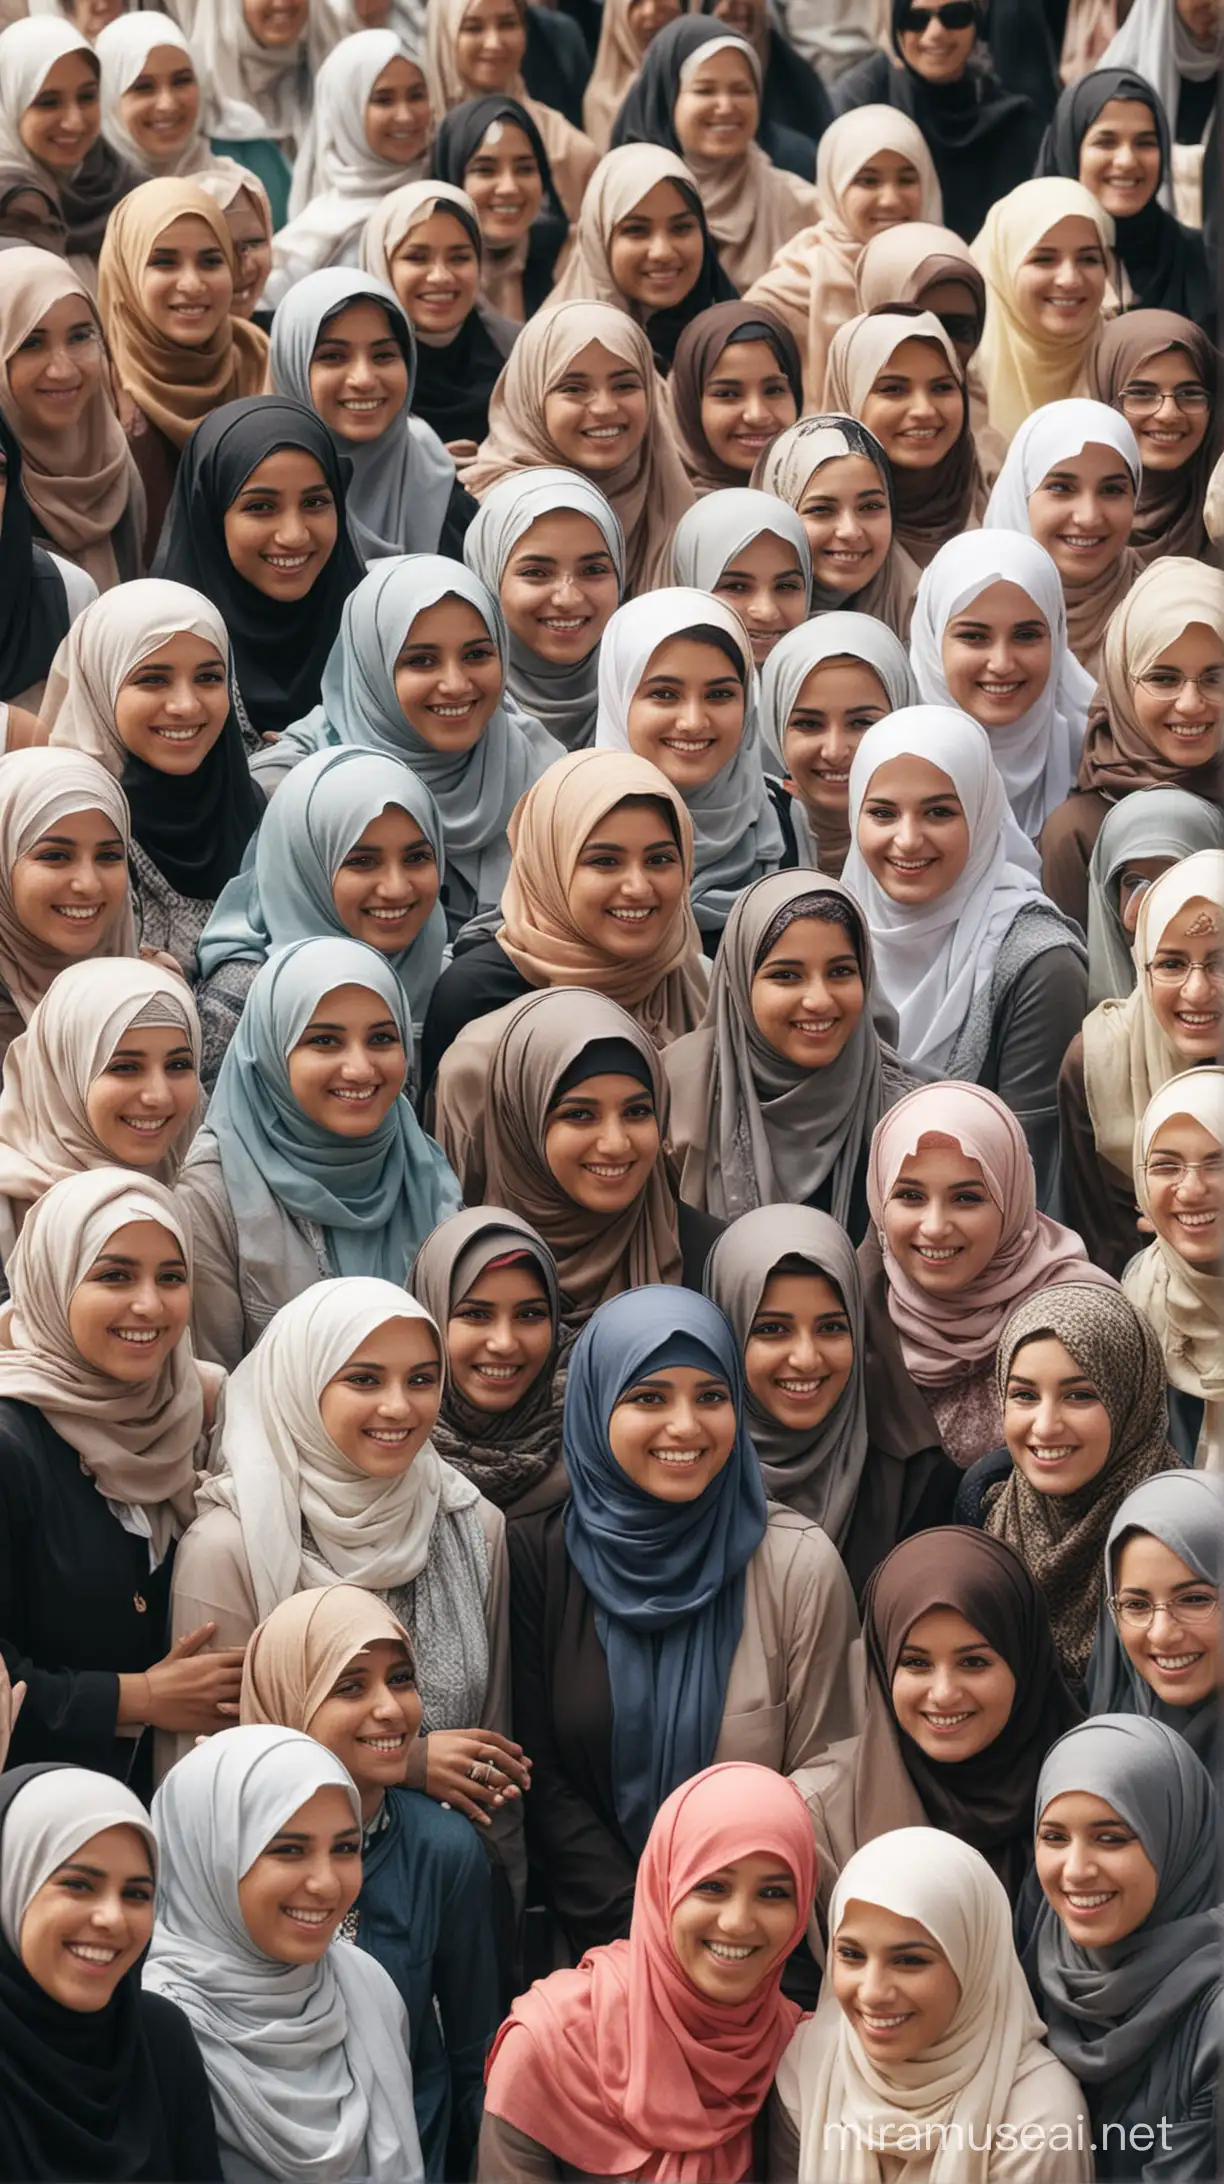 Image: A group of diverse Muslim women engaged in lively discussions and activities, symbolizing their active participation in society, like islamic sociaty